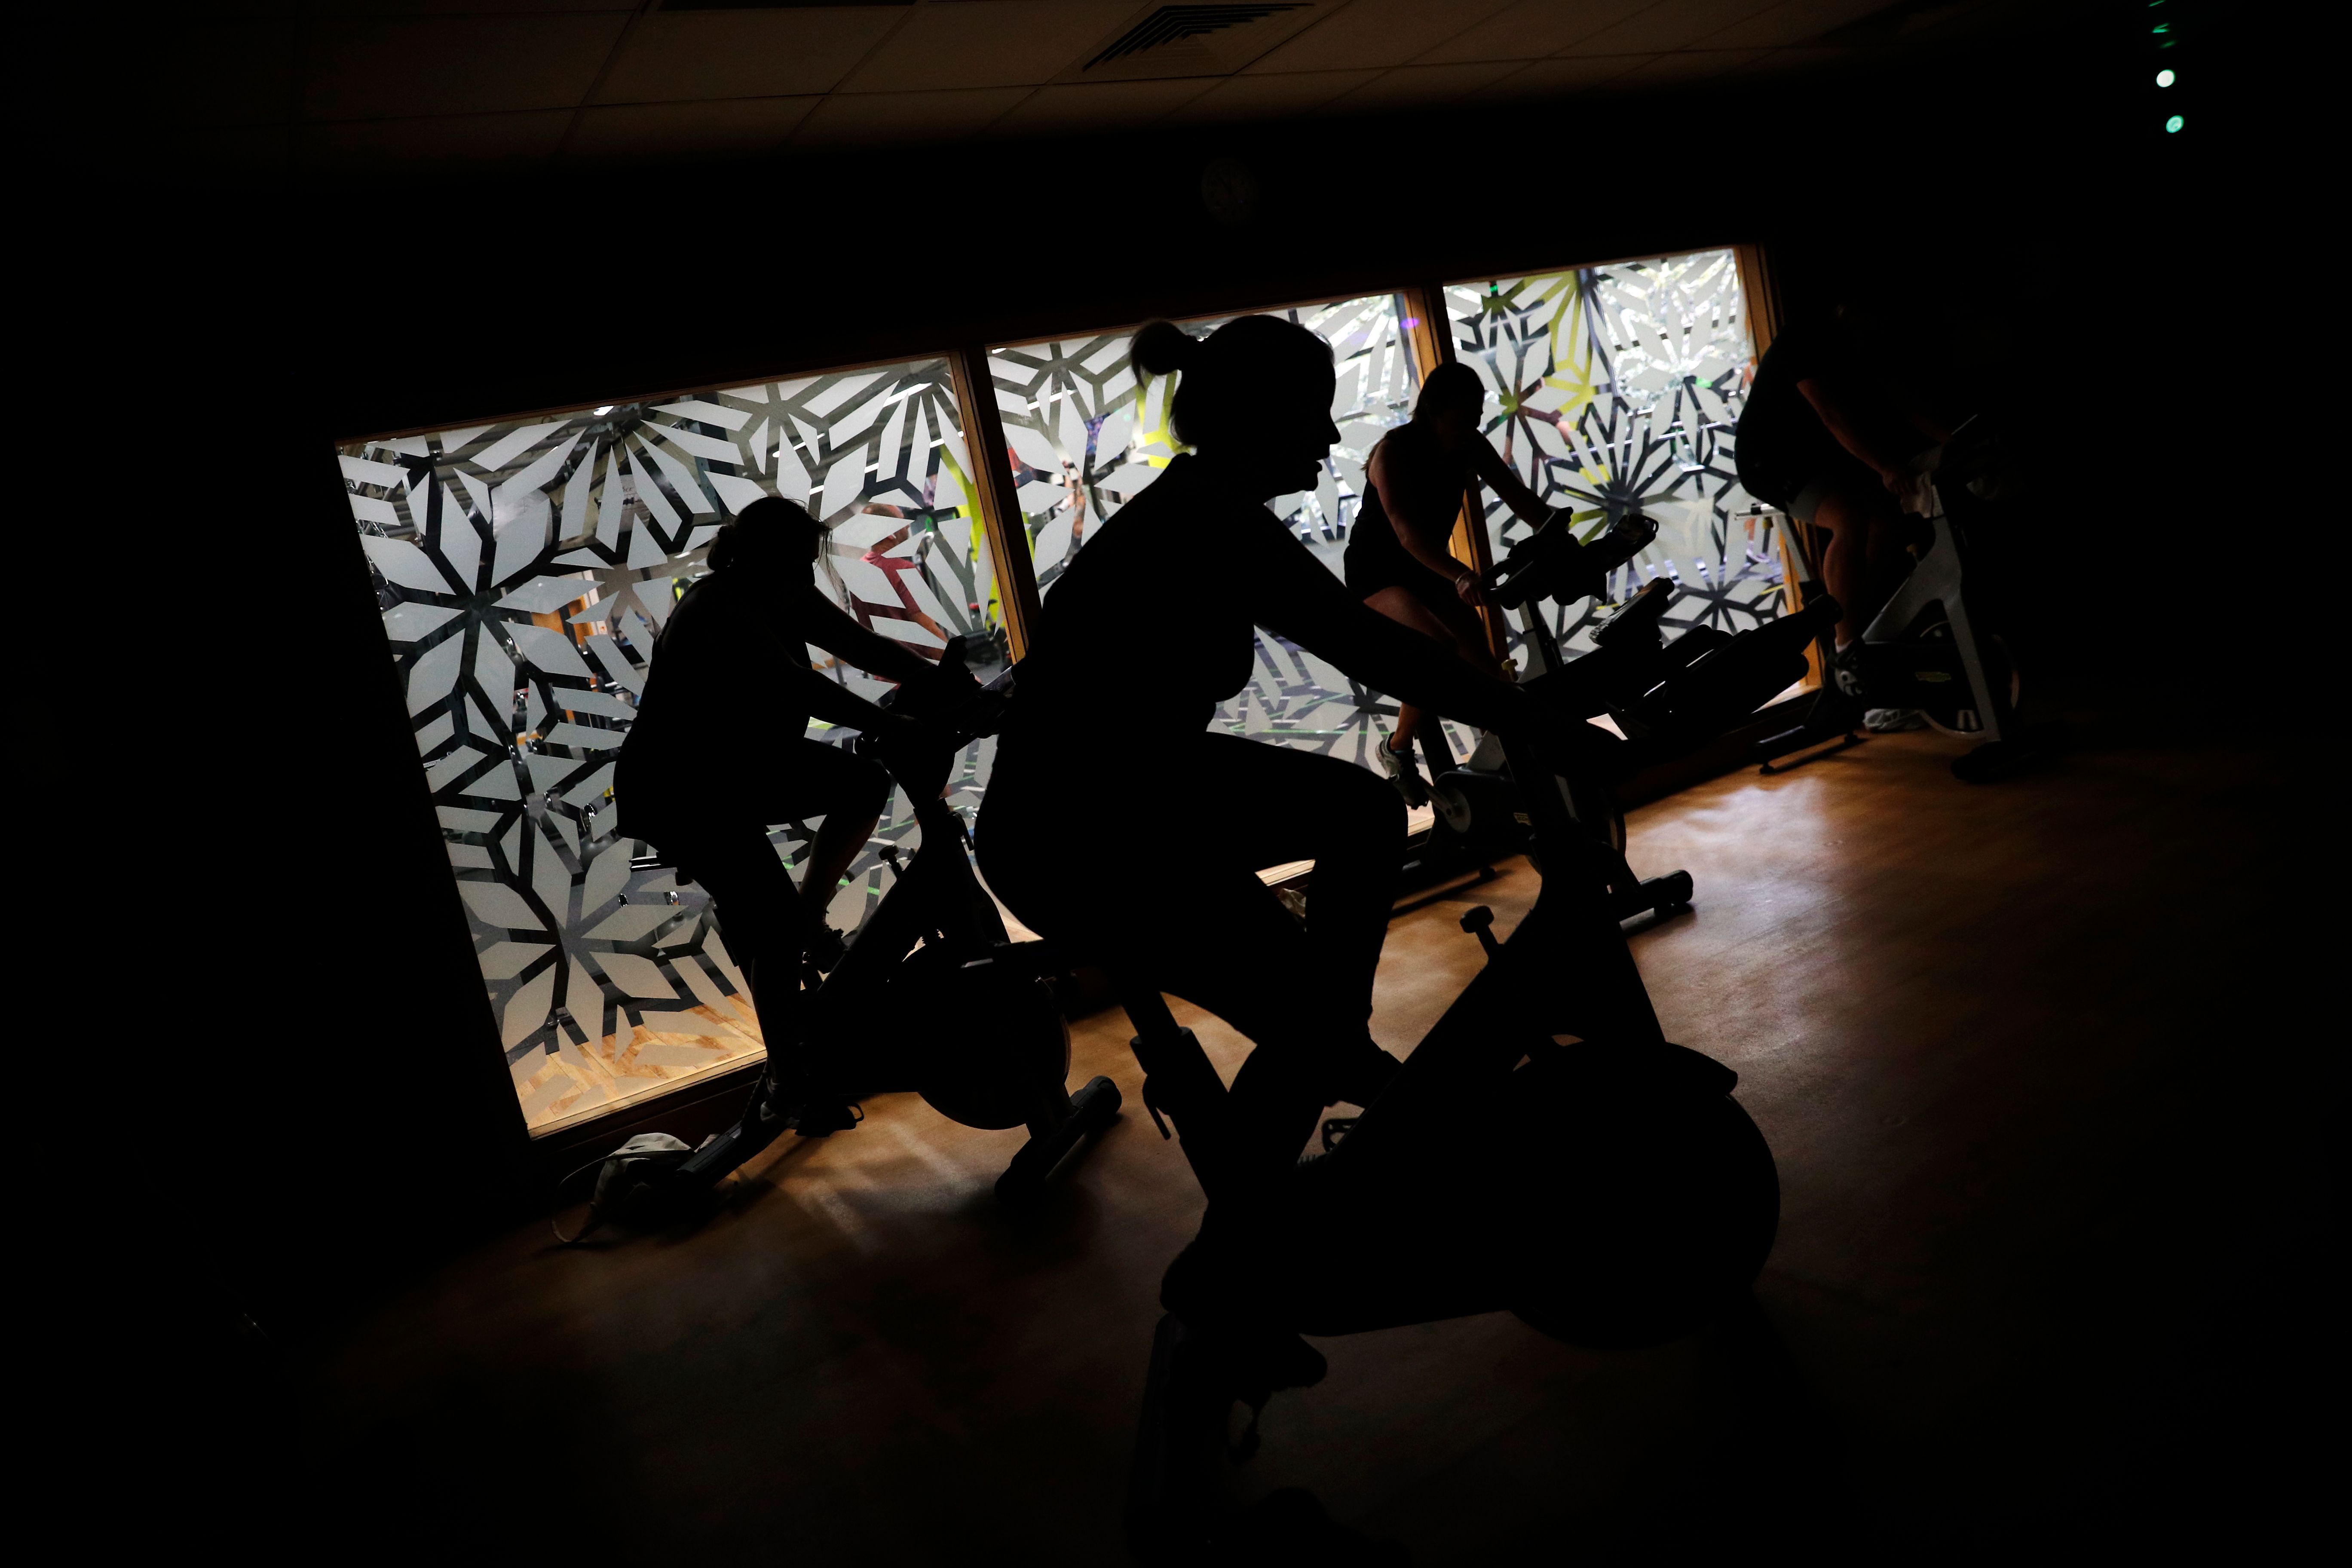 https://hips.hearstapps.com/hmg-prod/images/people-take-part-in-a-spin-class-riding-exercise-bicycles-news-photo-1701809054.jpg